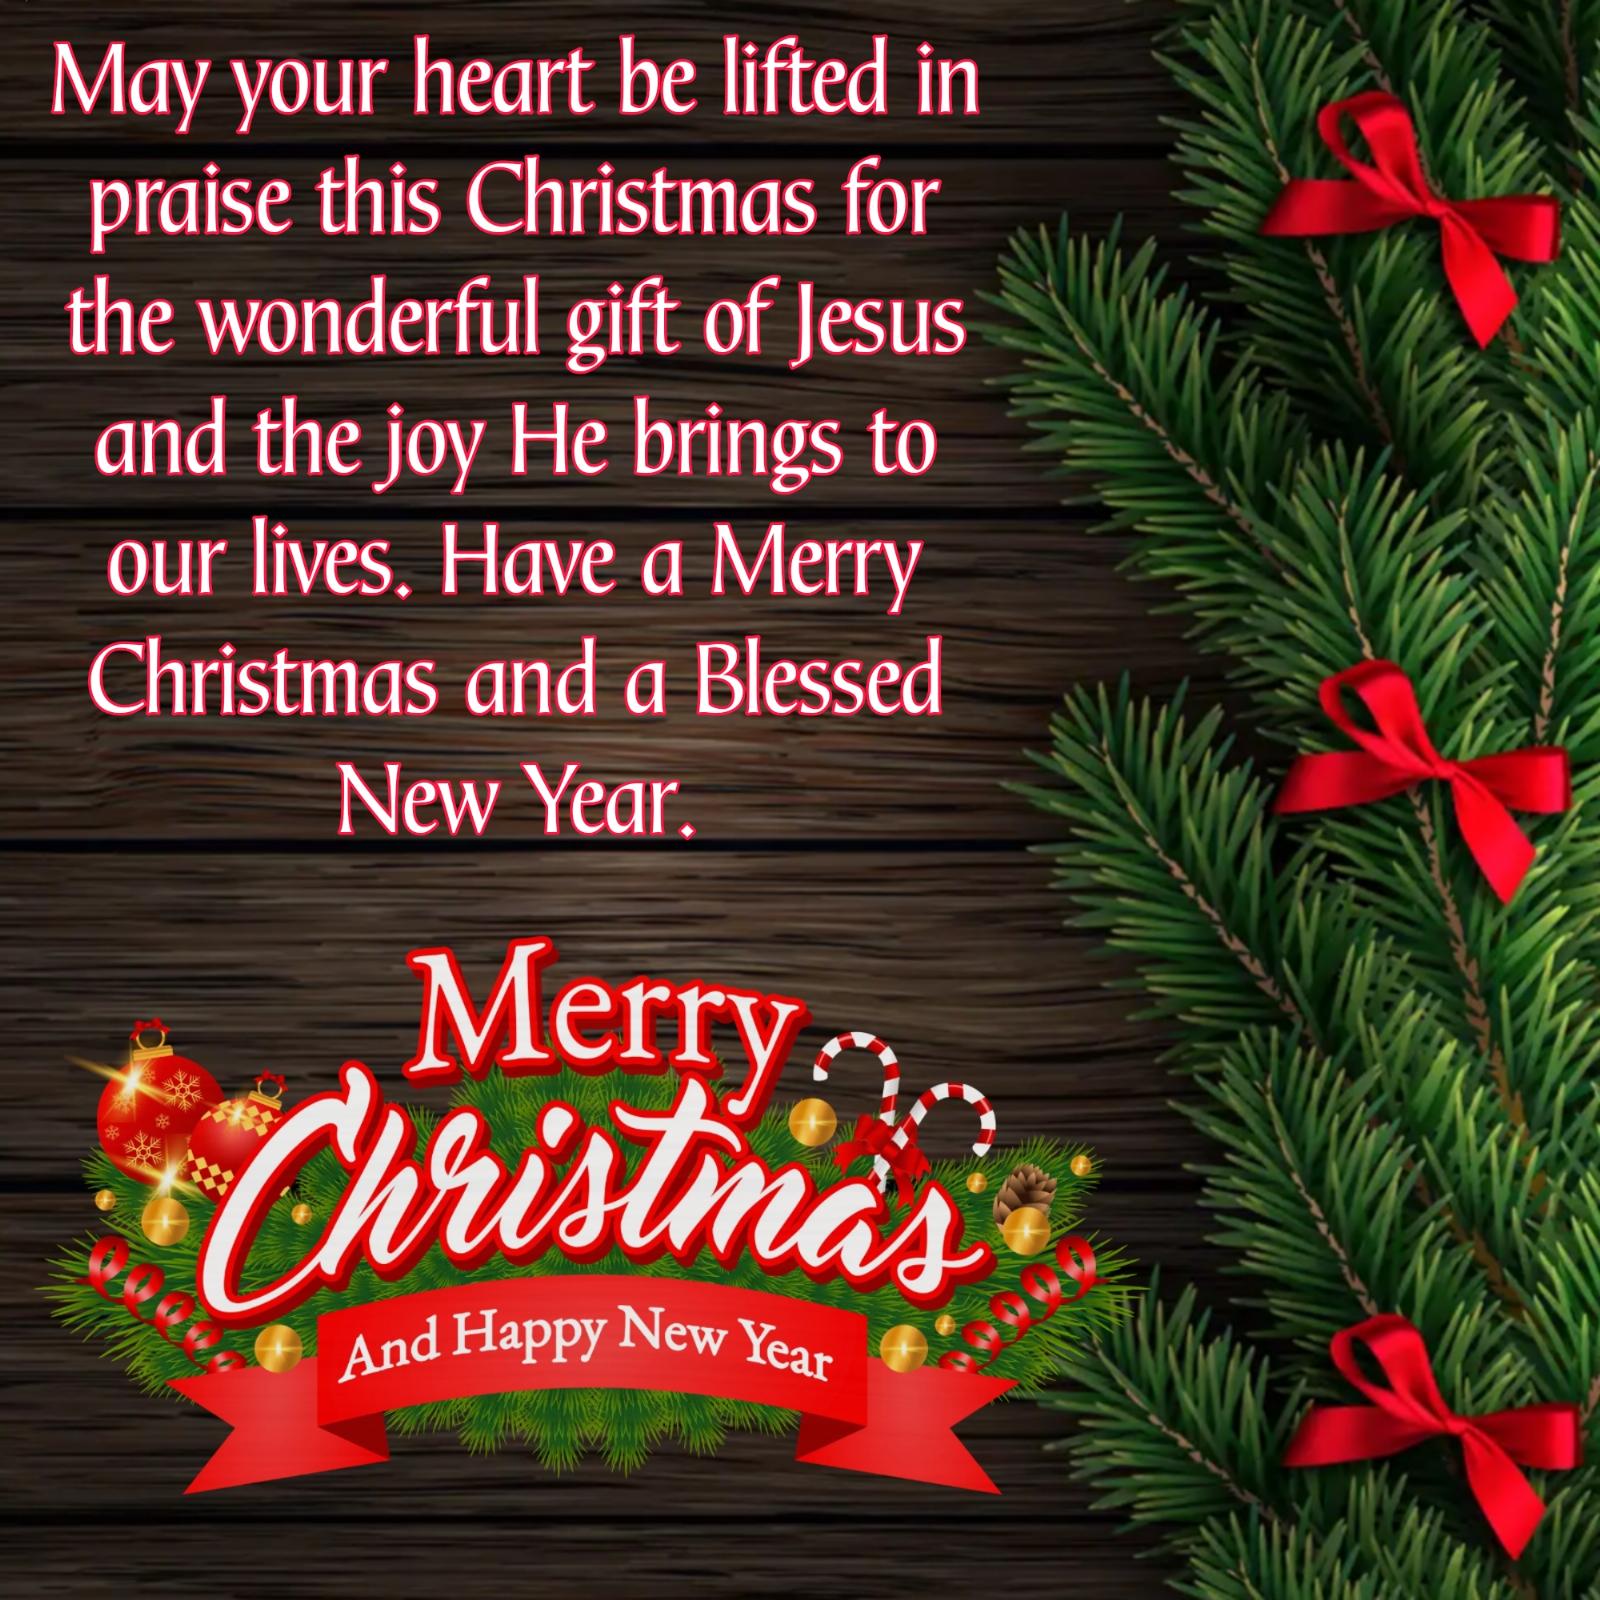 May your heart be lifted in praise this Christmas